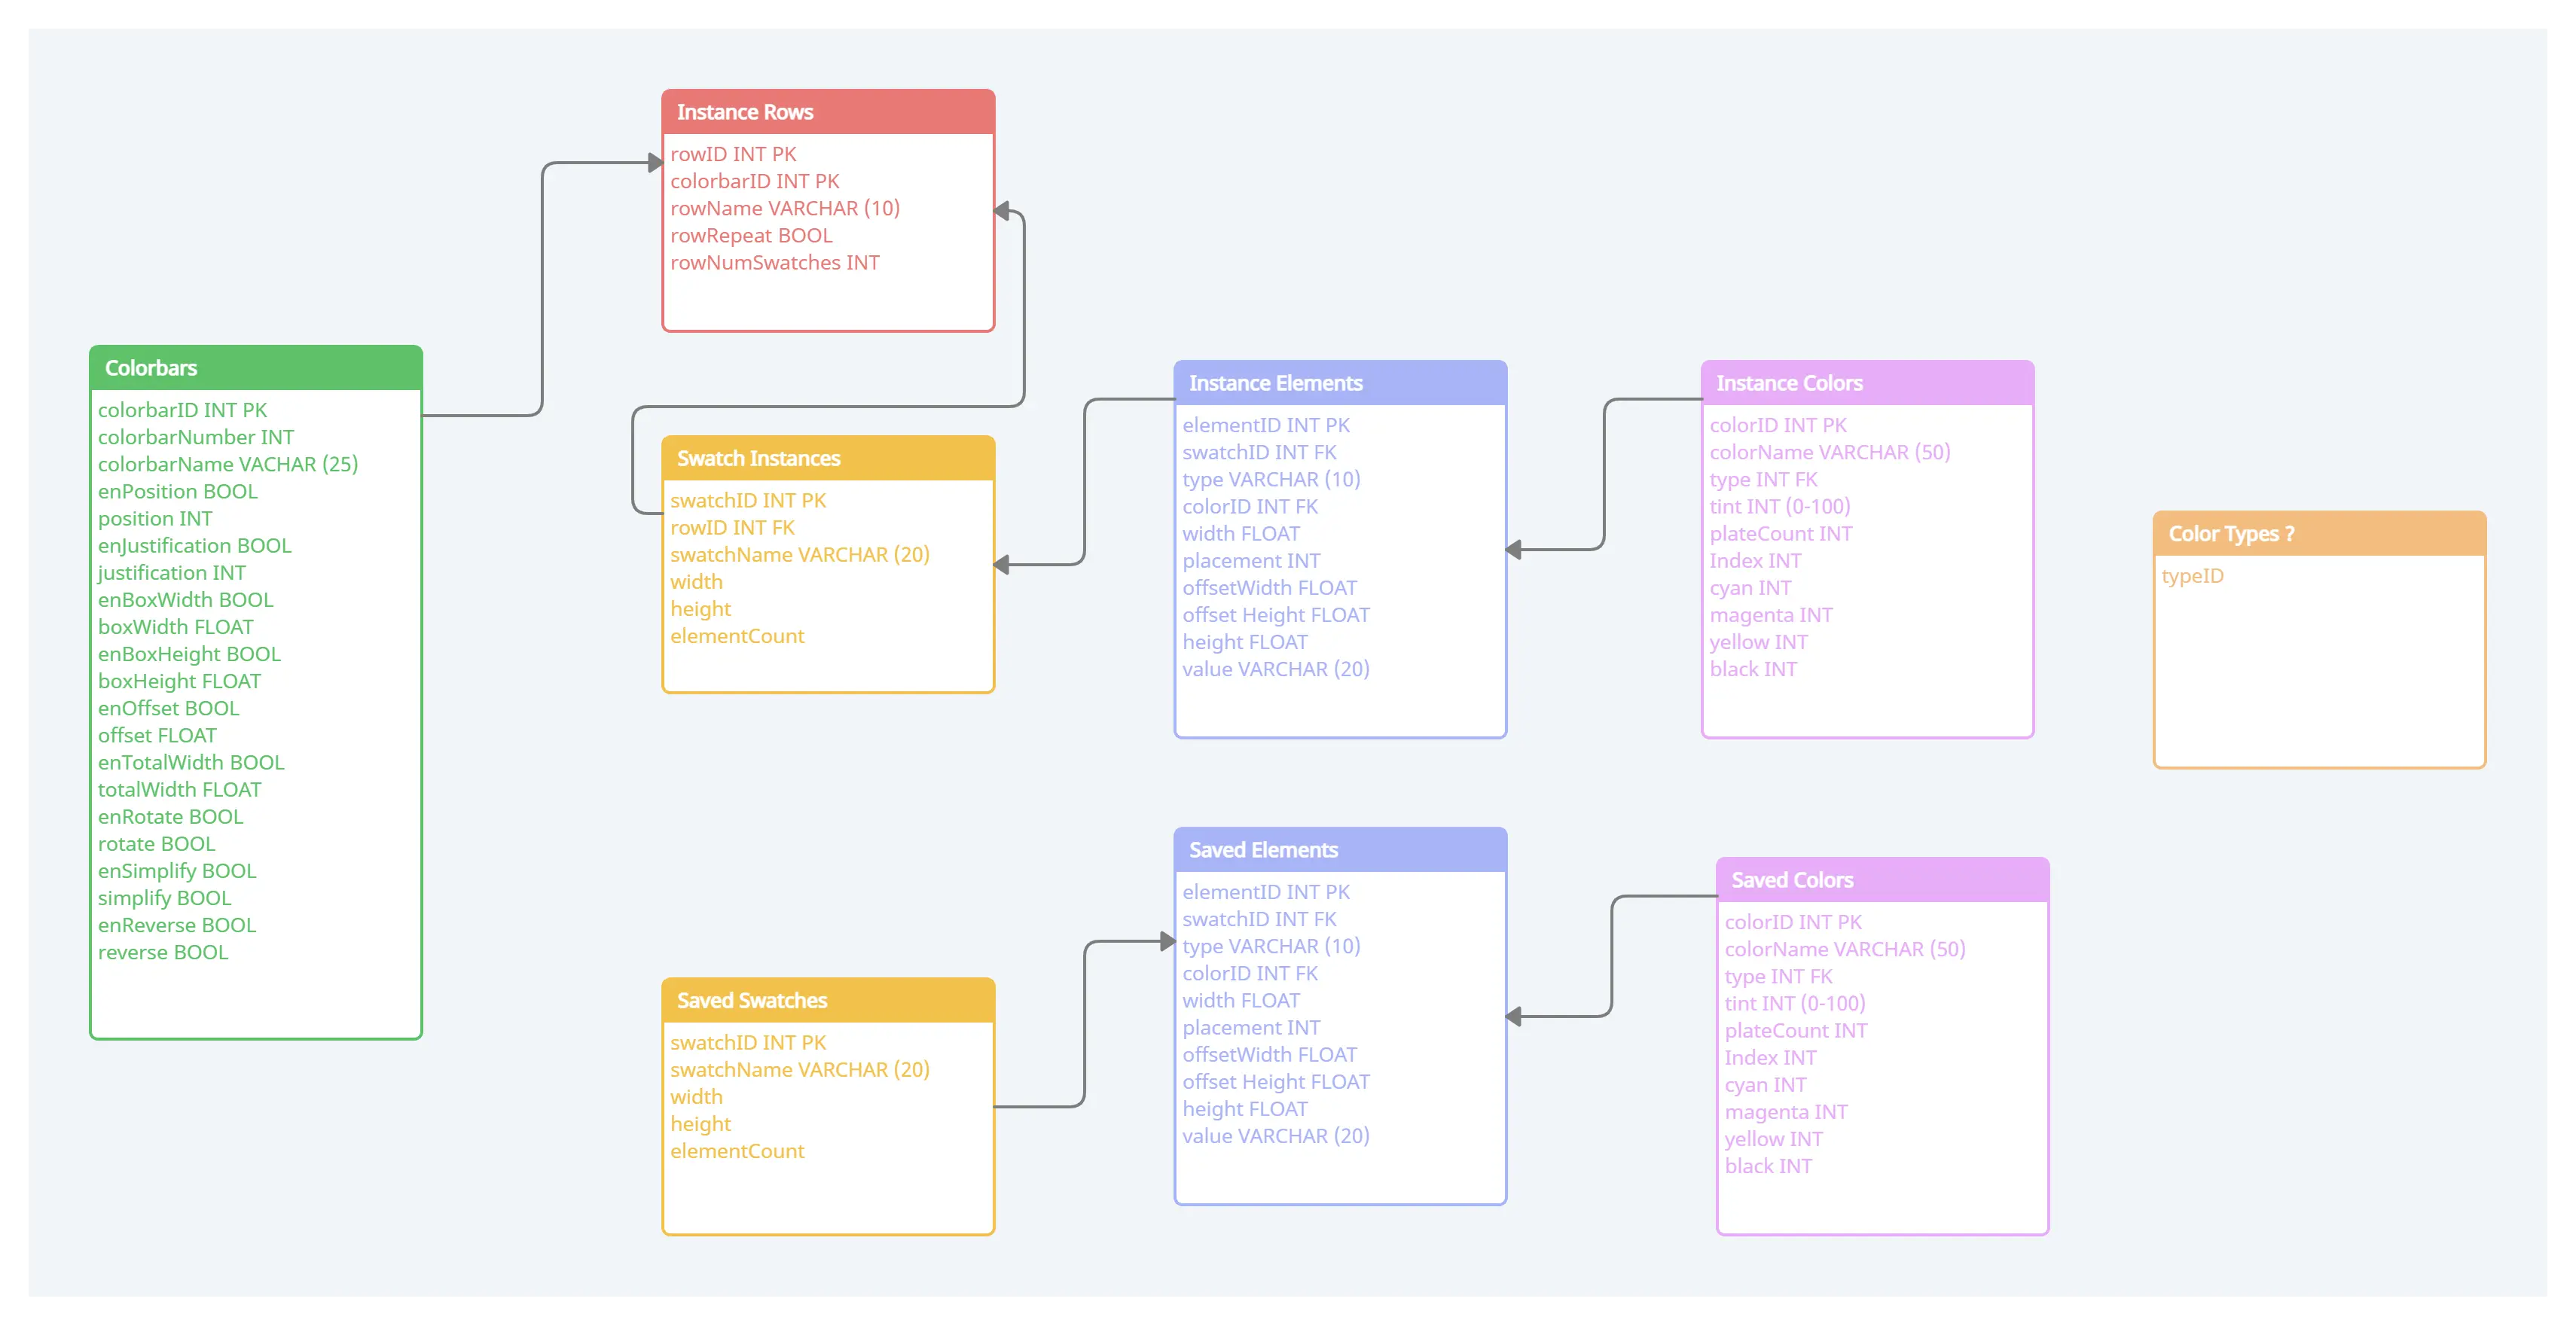 Using database templates to help cement your team's process